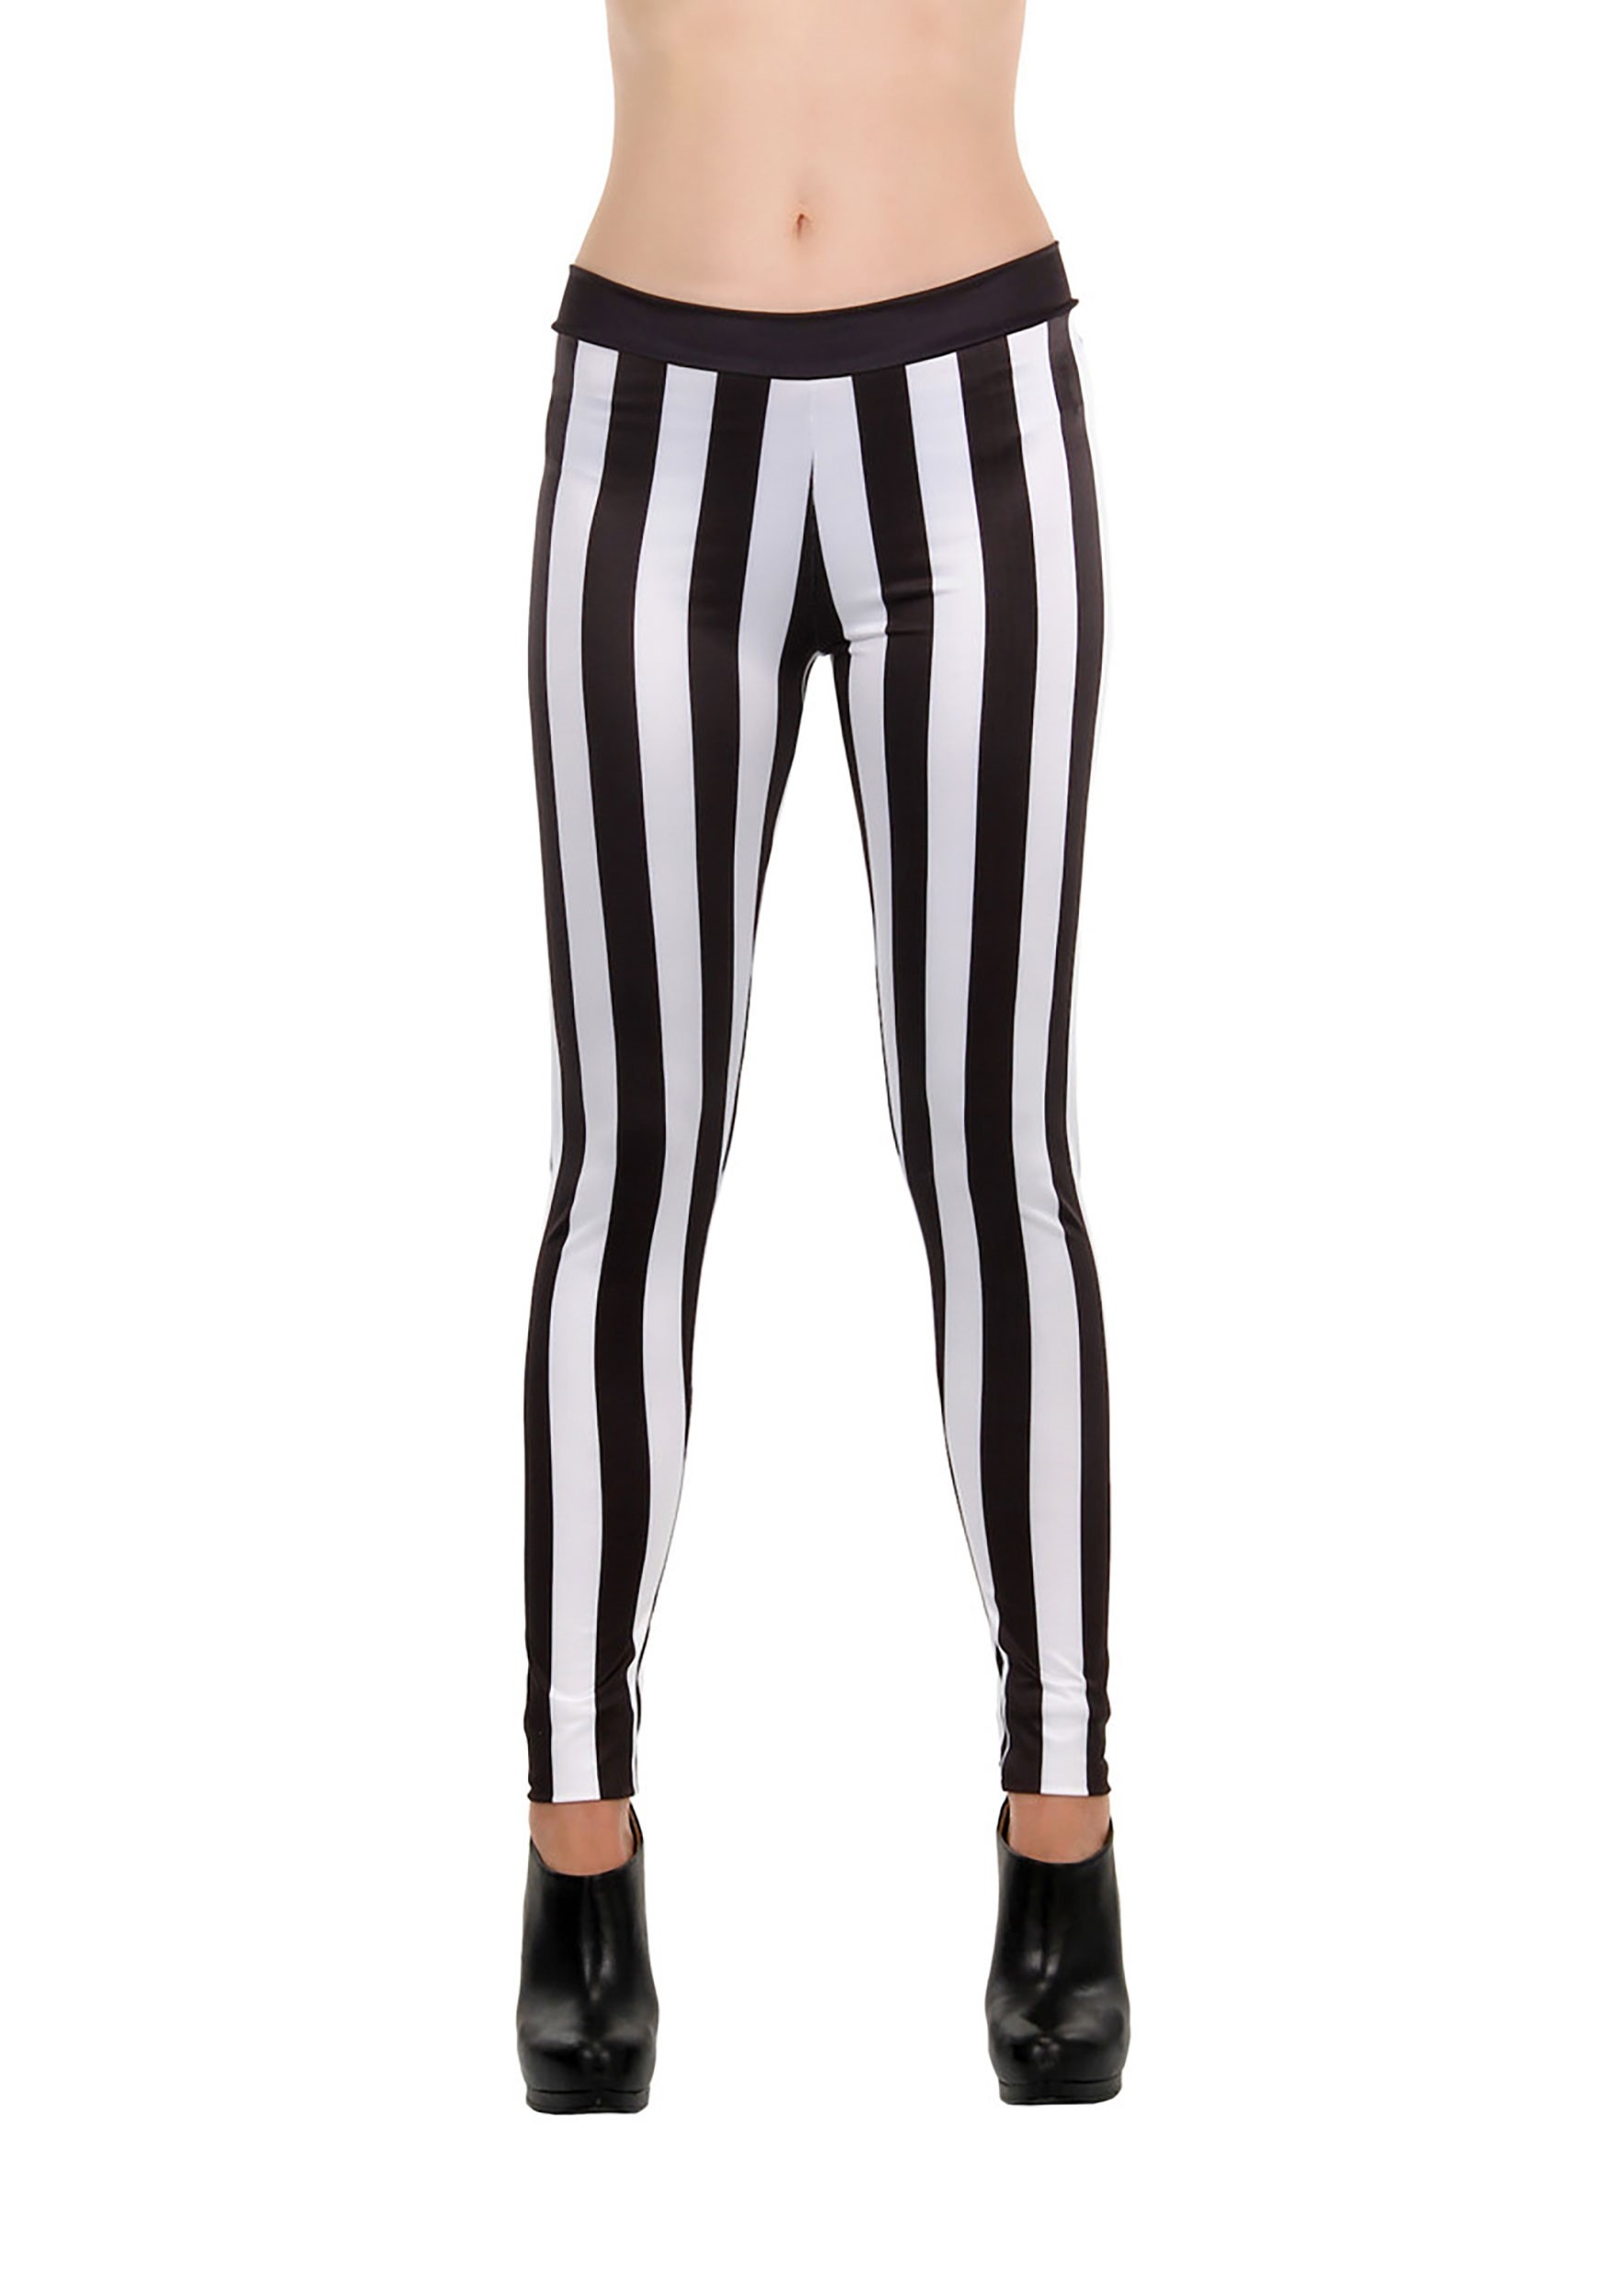 https://images.halloweencostumes.ca/products/69235/1-1/striped-leggings-one-size.jpg